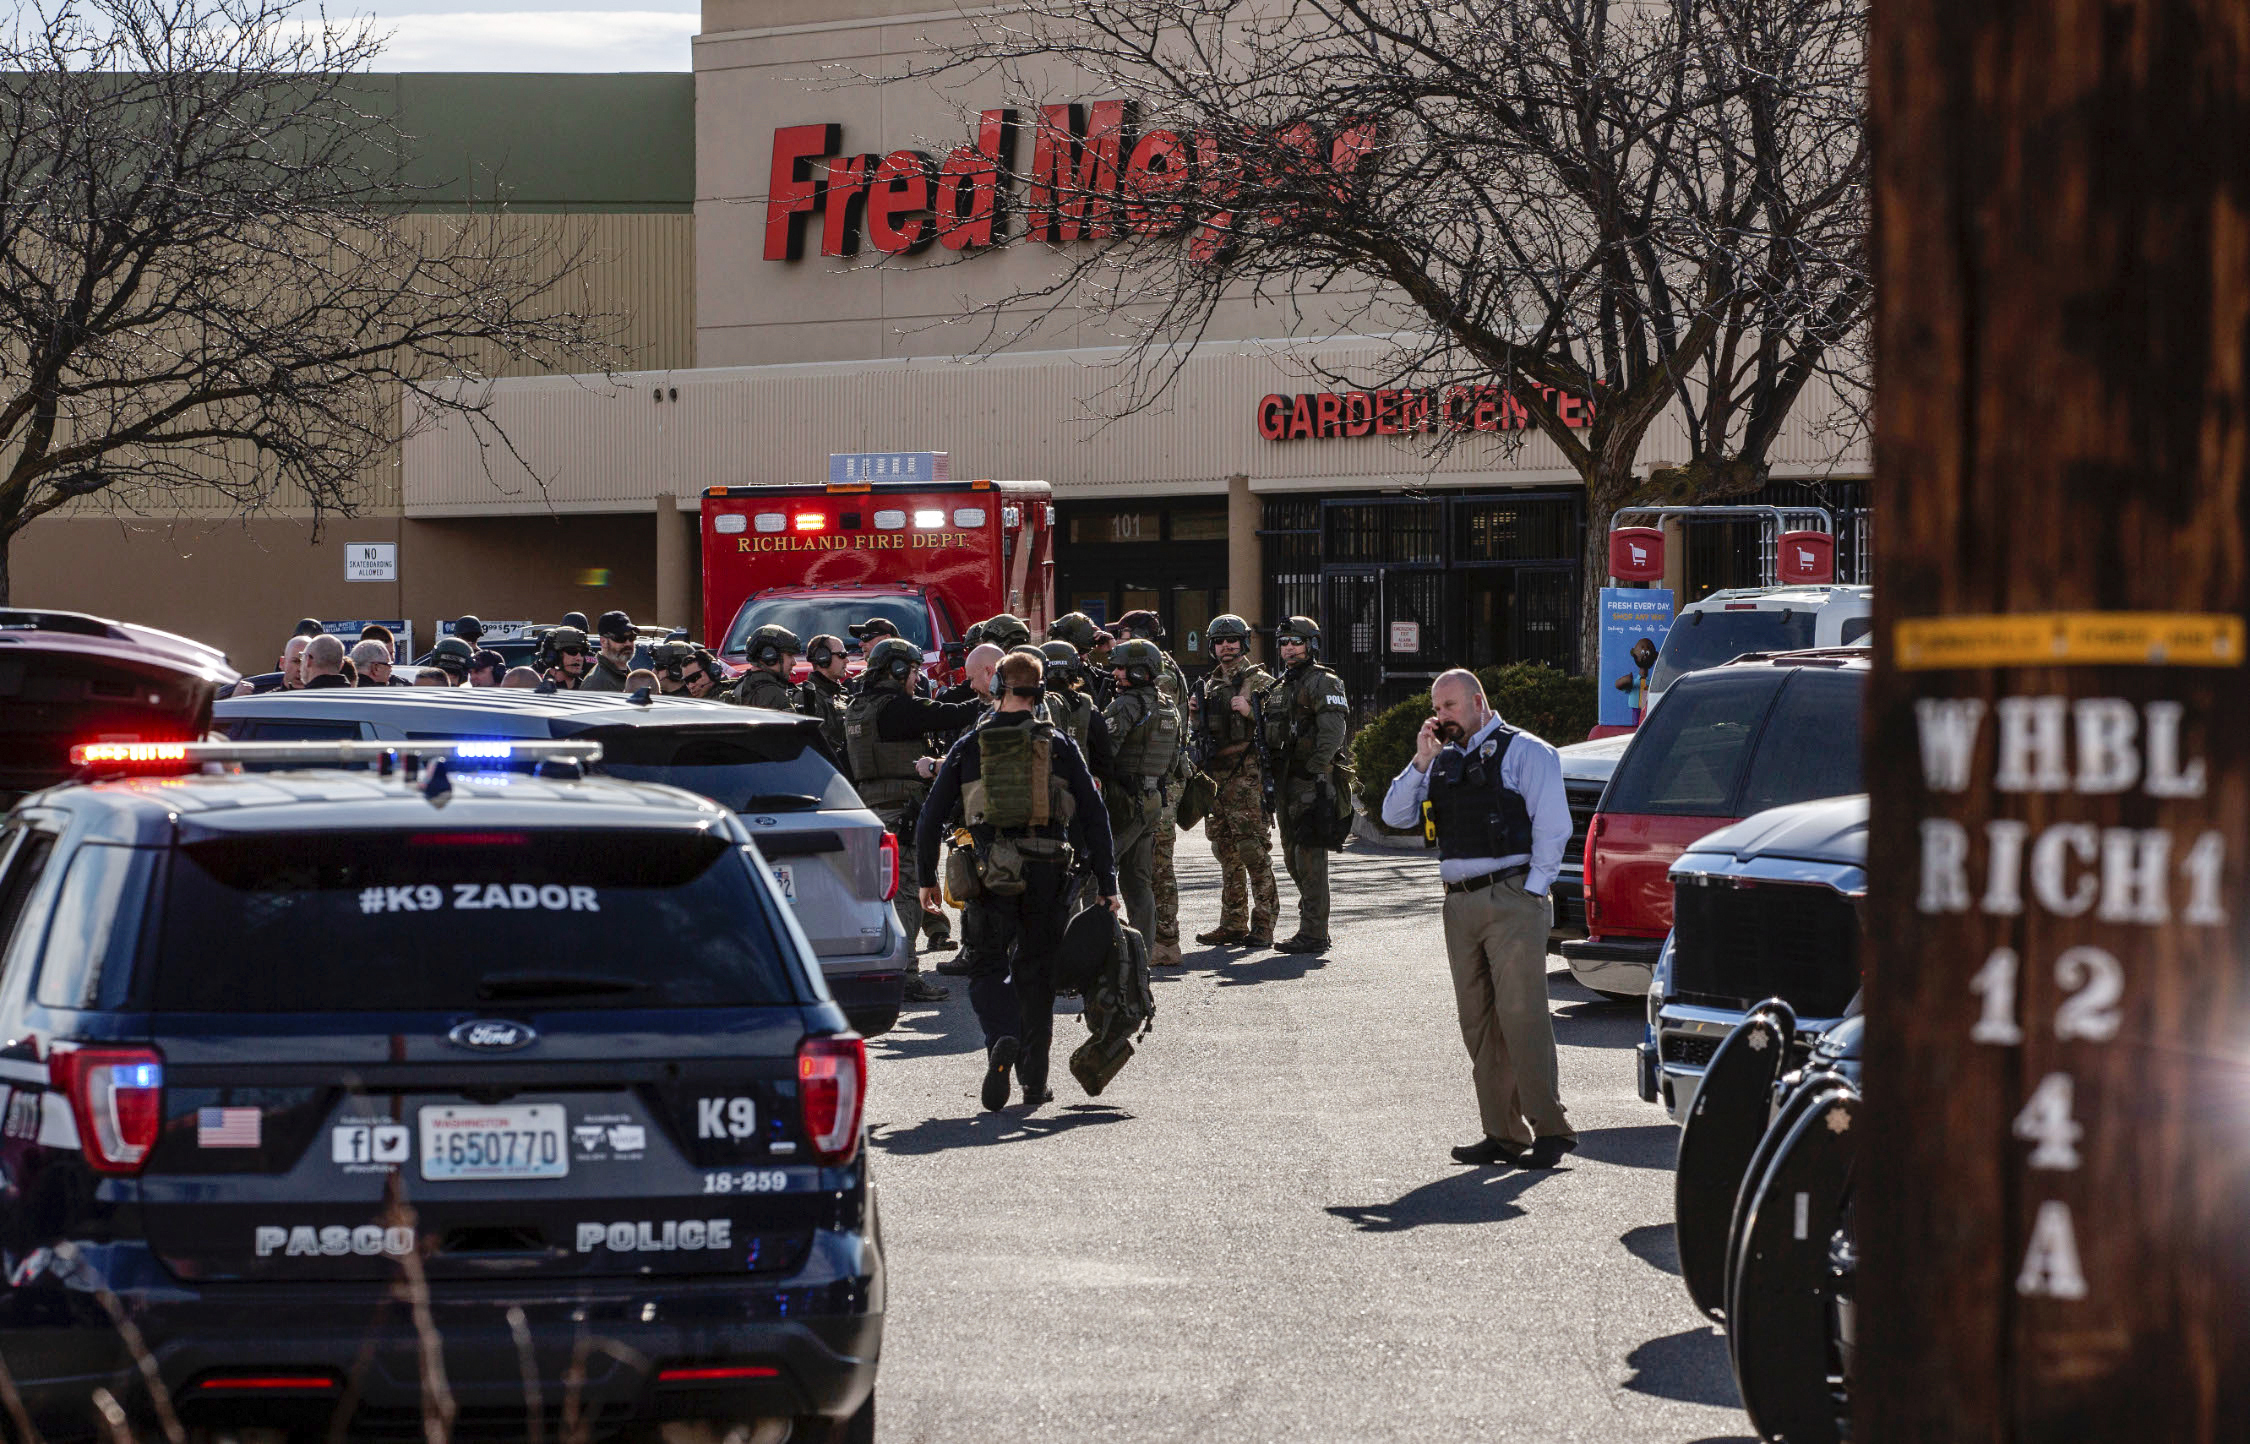 Authorities stage outside a Fred Meyer grocery store after a fatal shooting at the business on Wellsian Way in Richland, Wash., Monday, Feb. 7, 2022. (Jennifer King/The News Tribune via AP)